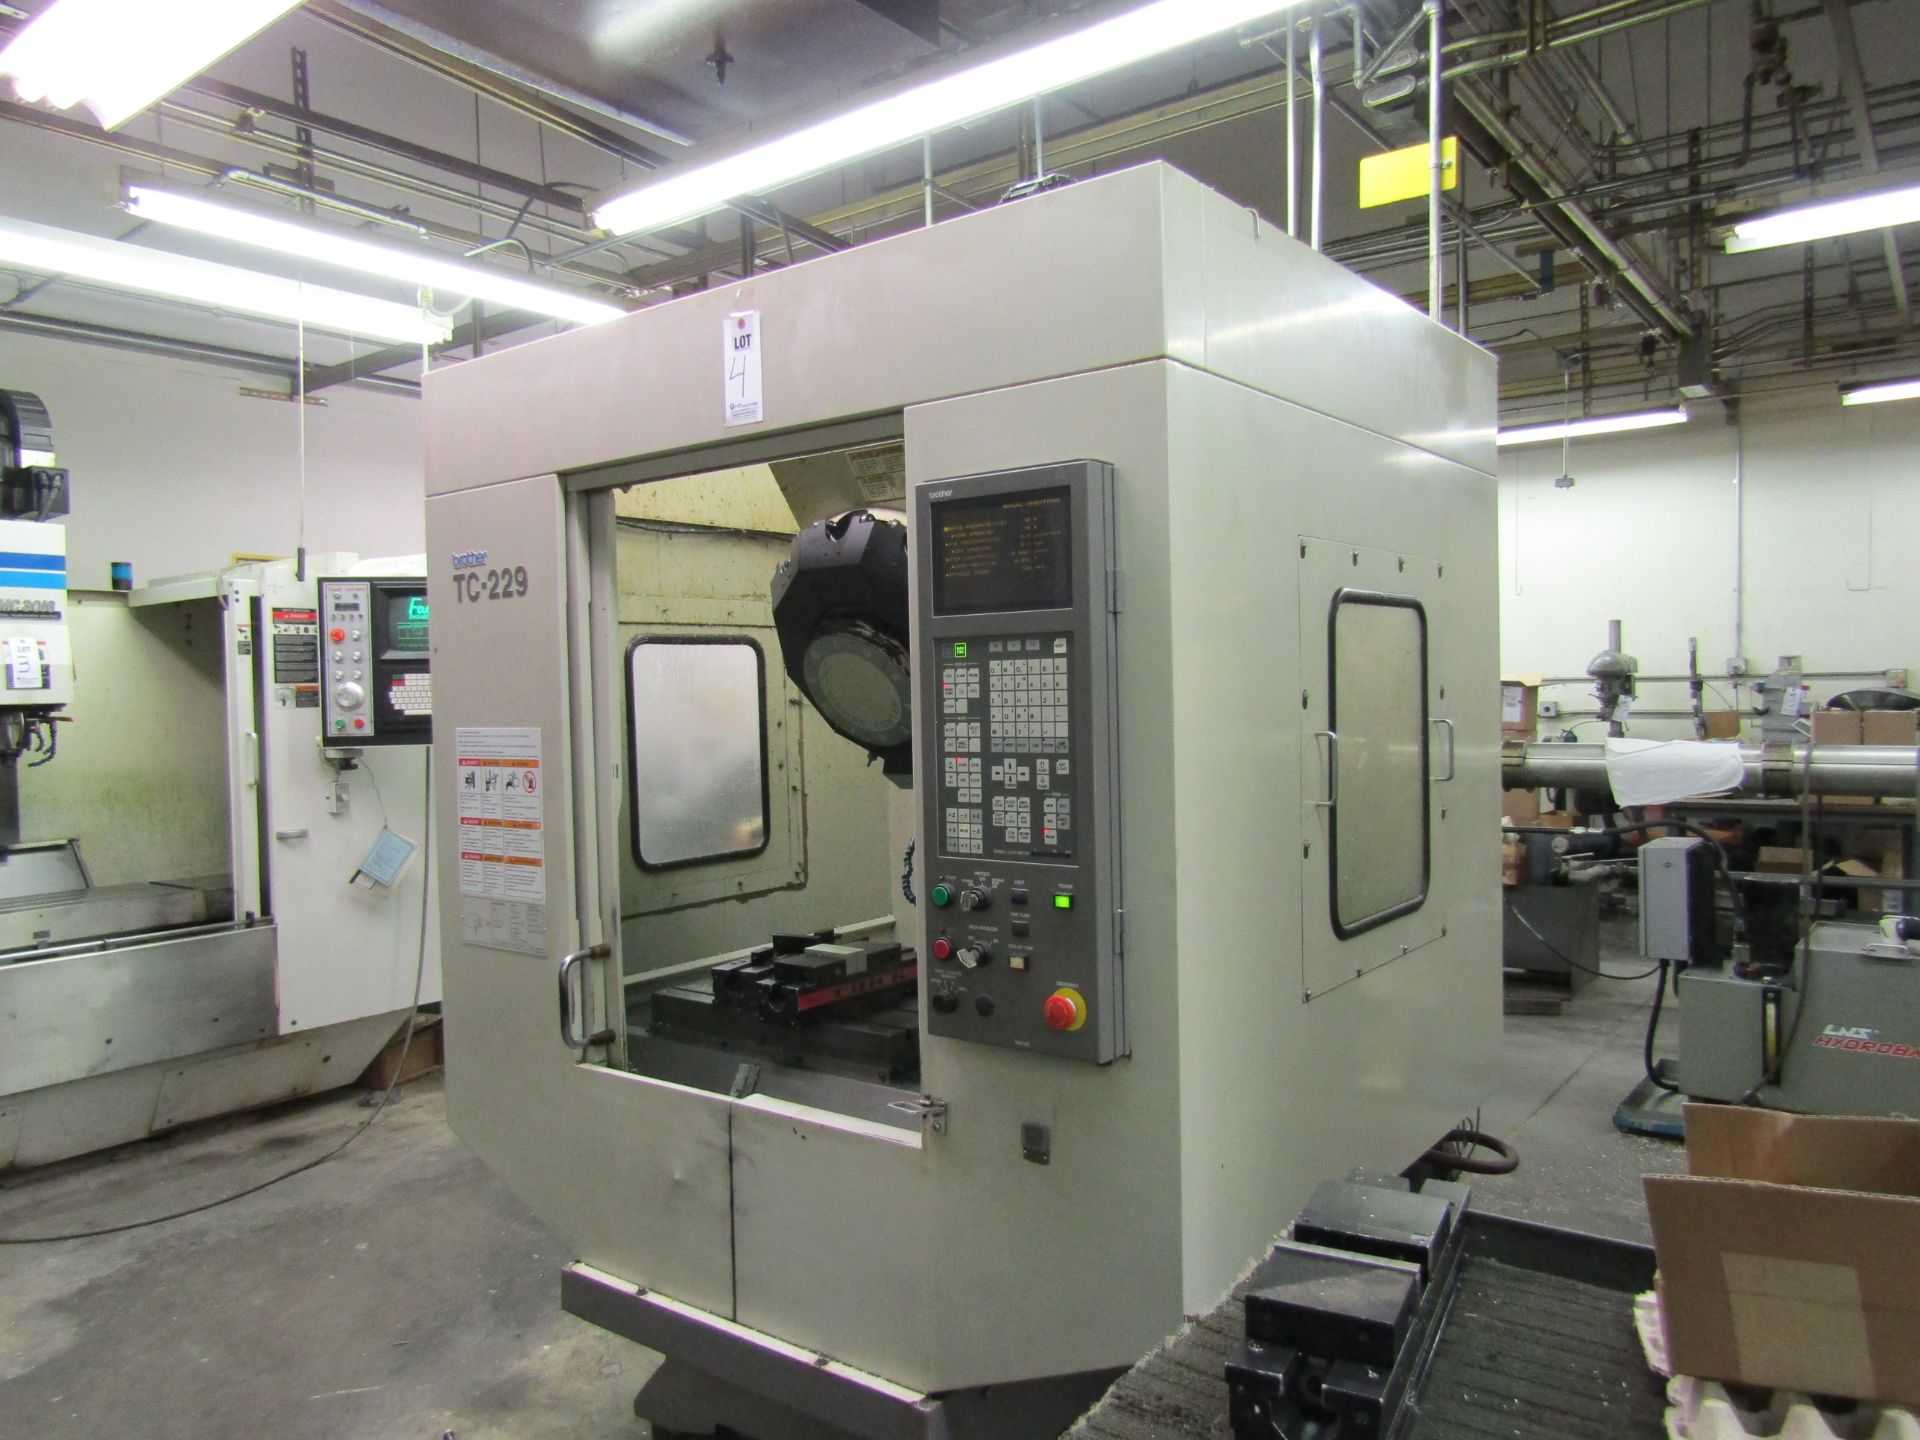 1996 BROTHER TC229 DRILL & TAPPING CNC CENTER, 10 TOOL ATC, TABLE SIZE 10"x24", BROTHER CNC CONTROL, - Image 2 of 6